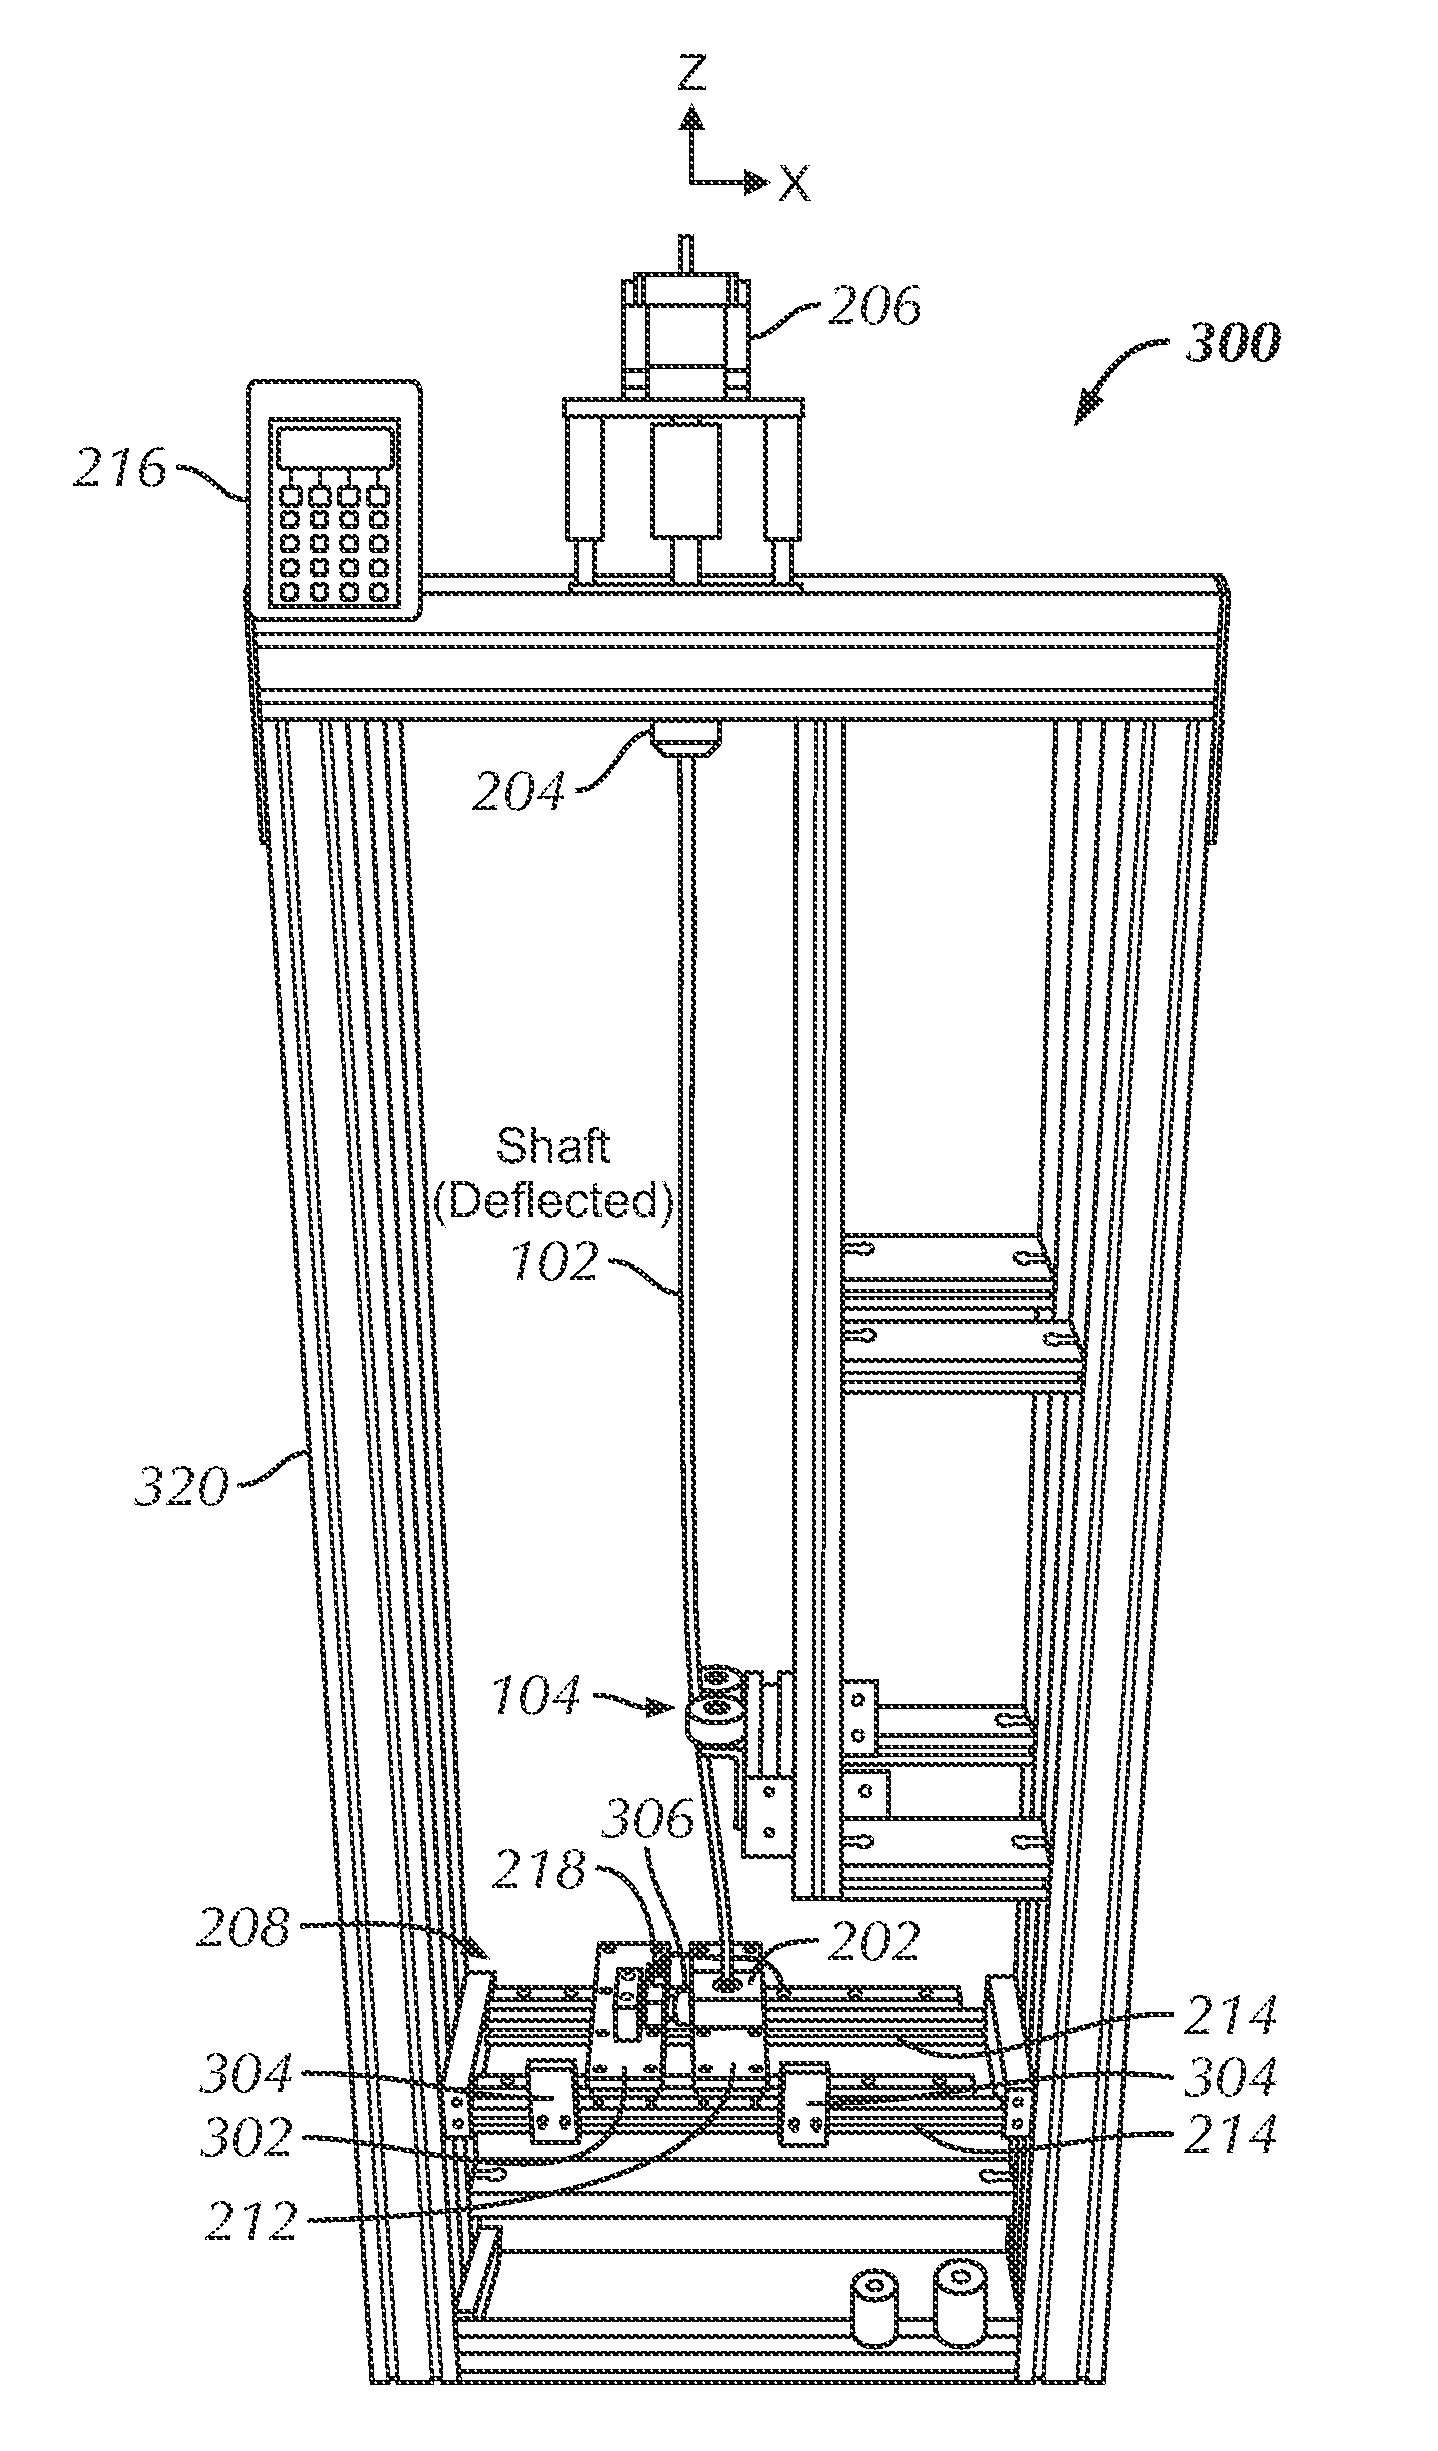 Method and Apparatus for Testing Shafts